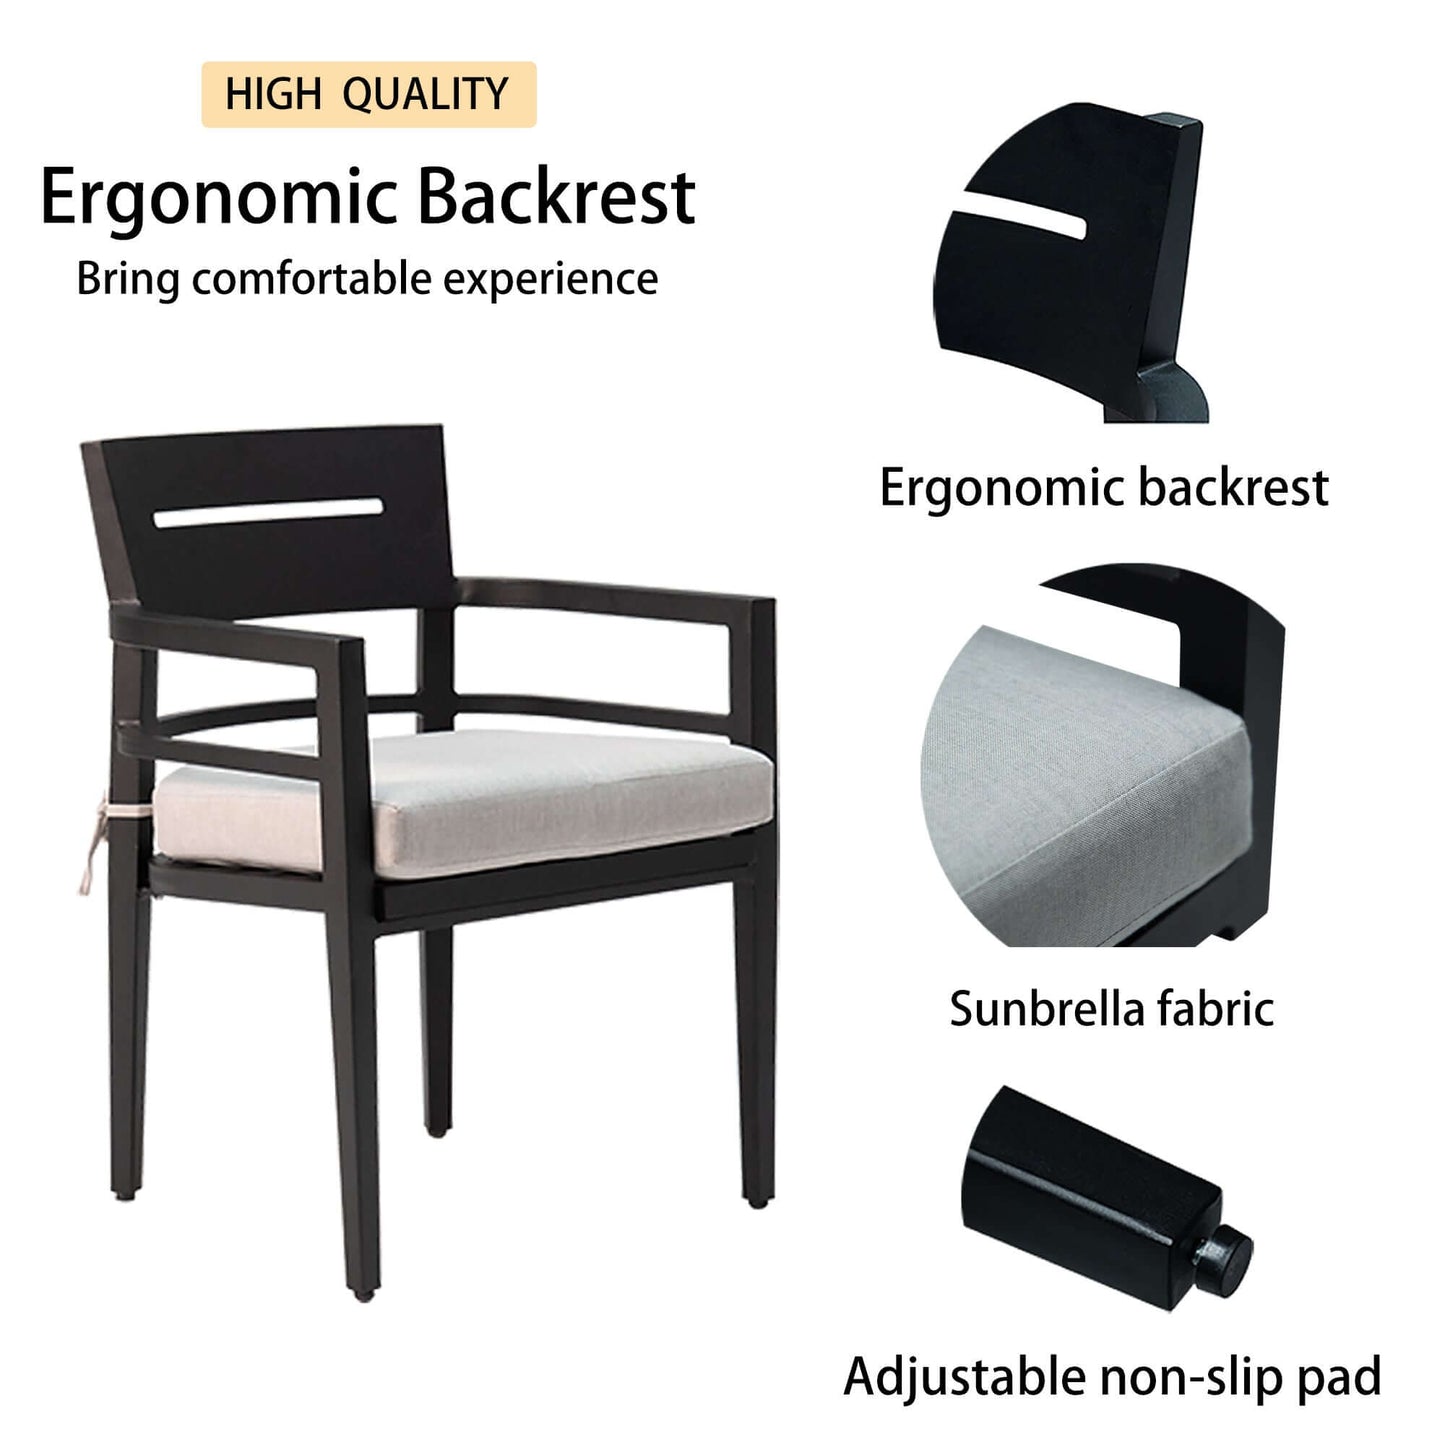 5-piece outdoor patio dining chair with ergonomic backrest, Sunbrella fabric cushion, and adjustable non-slip pad, Ember Black.